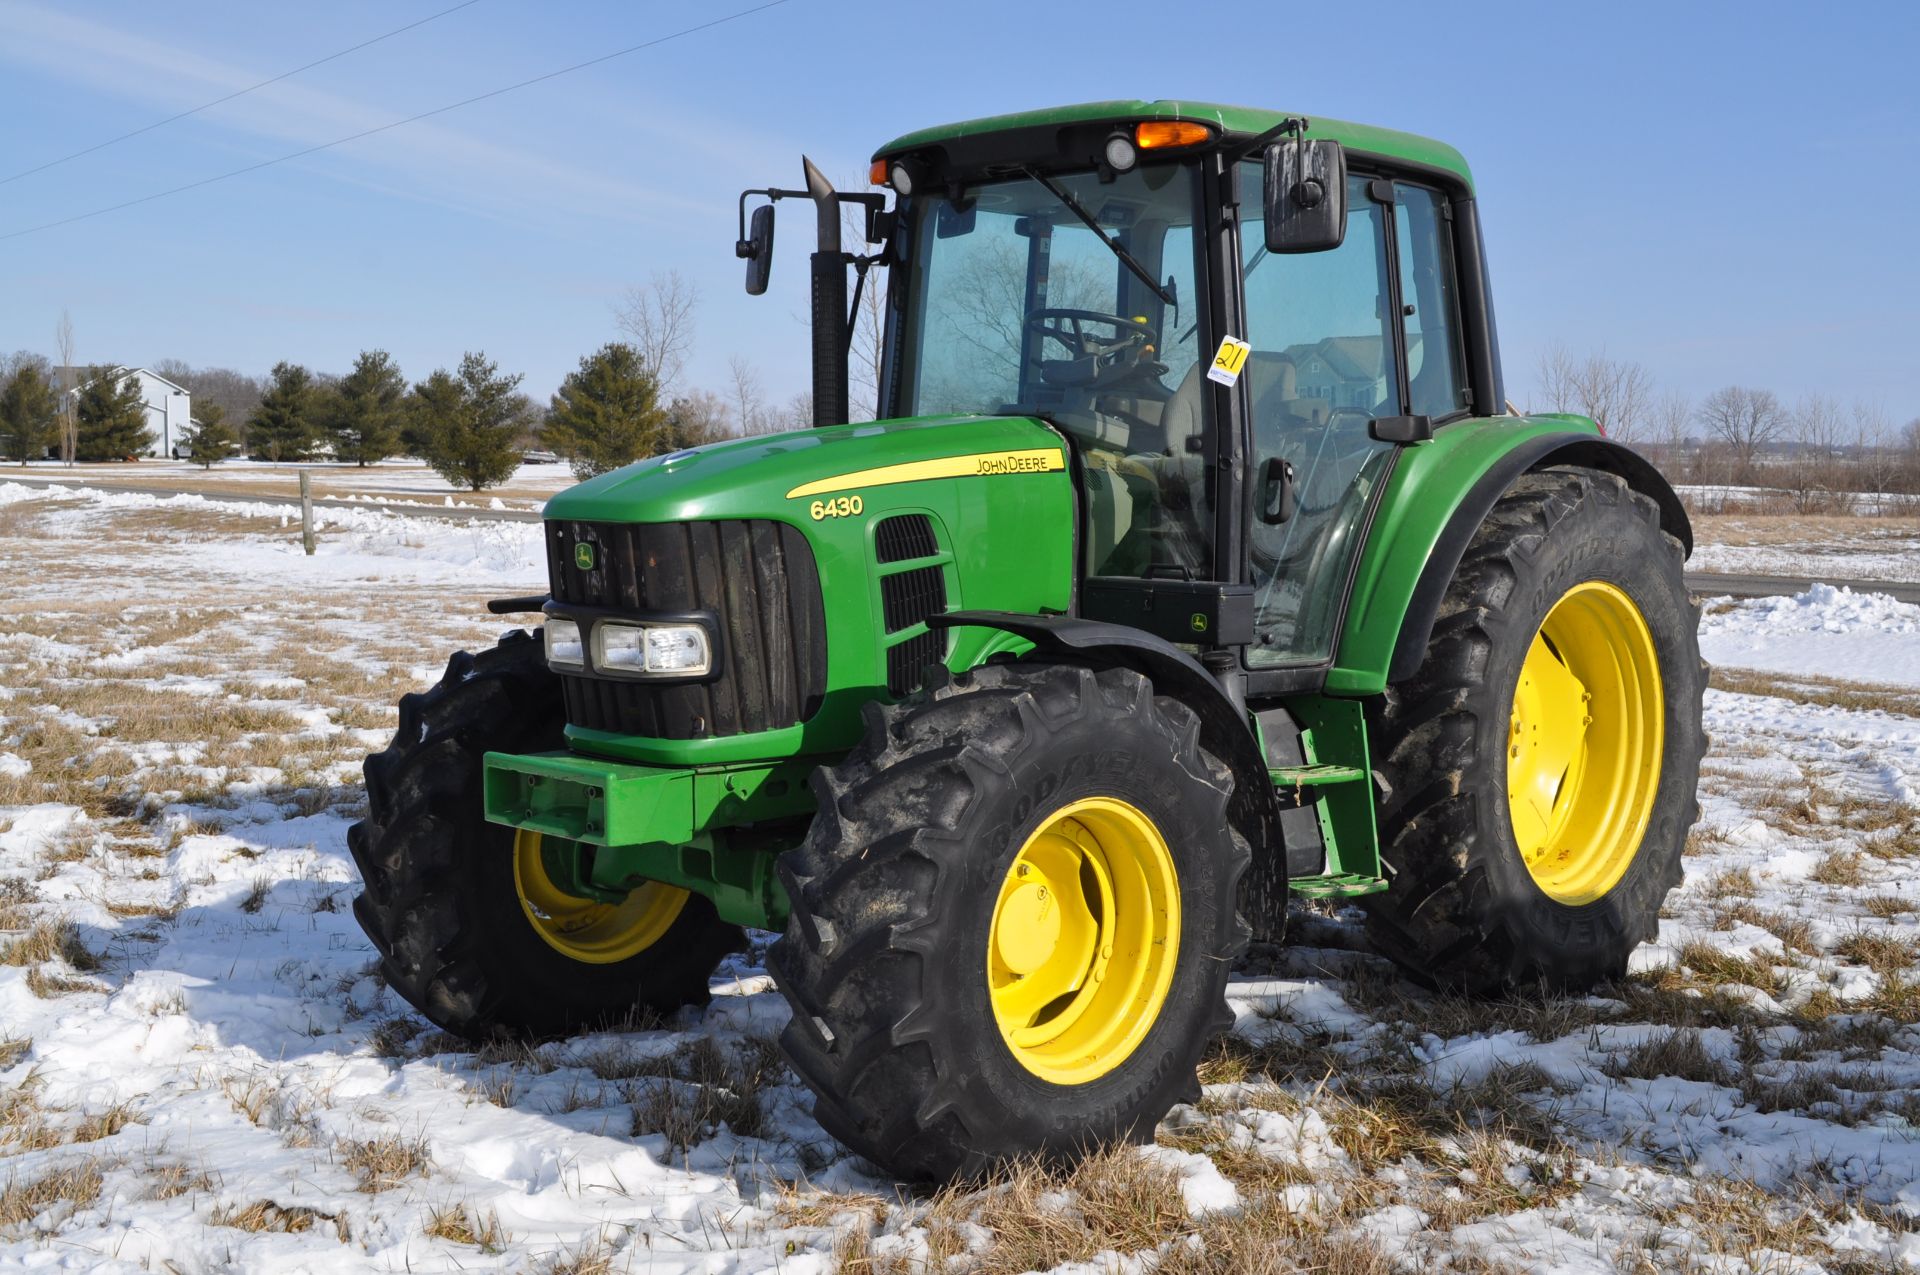 John Deere 6430 tractor, MFWD, C/H/A, 6x4 trans, 460/85R38 rear, 420/85R24 front, front fenders,